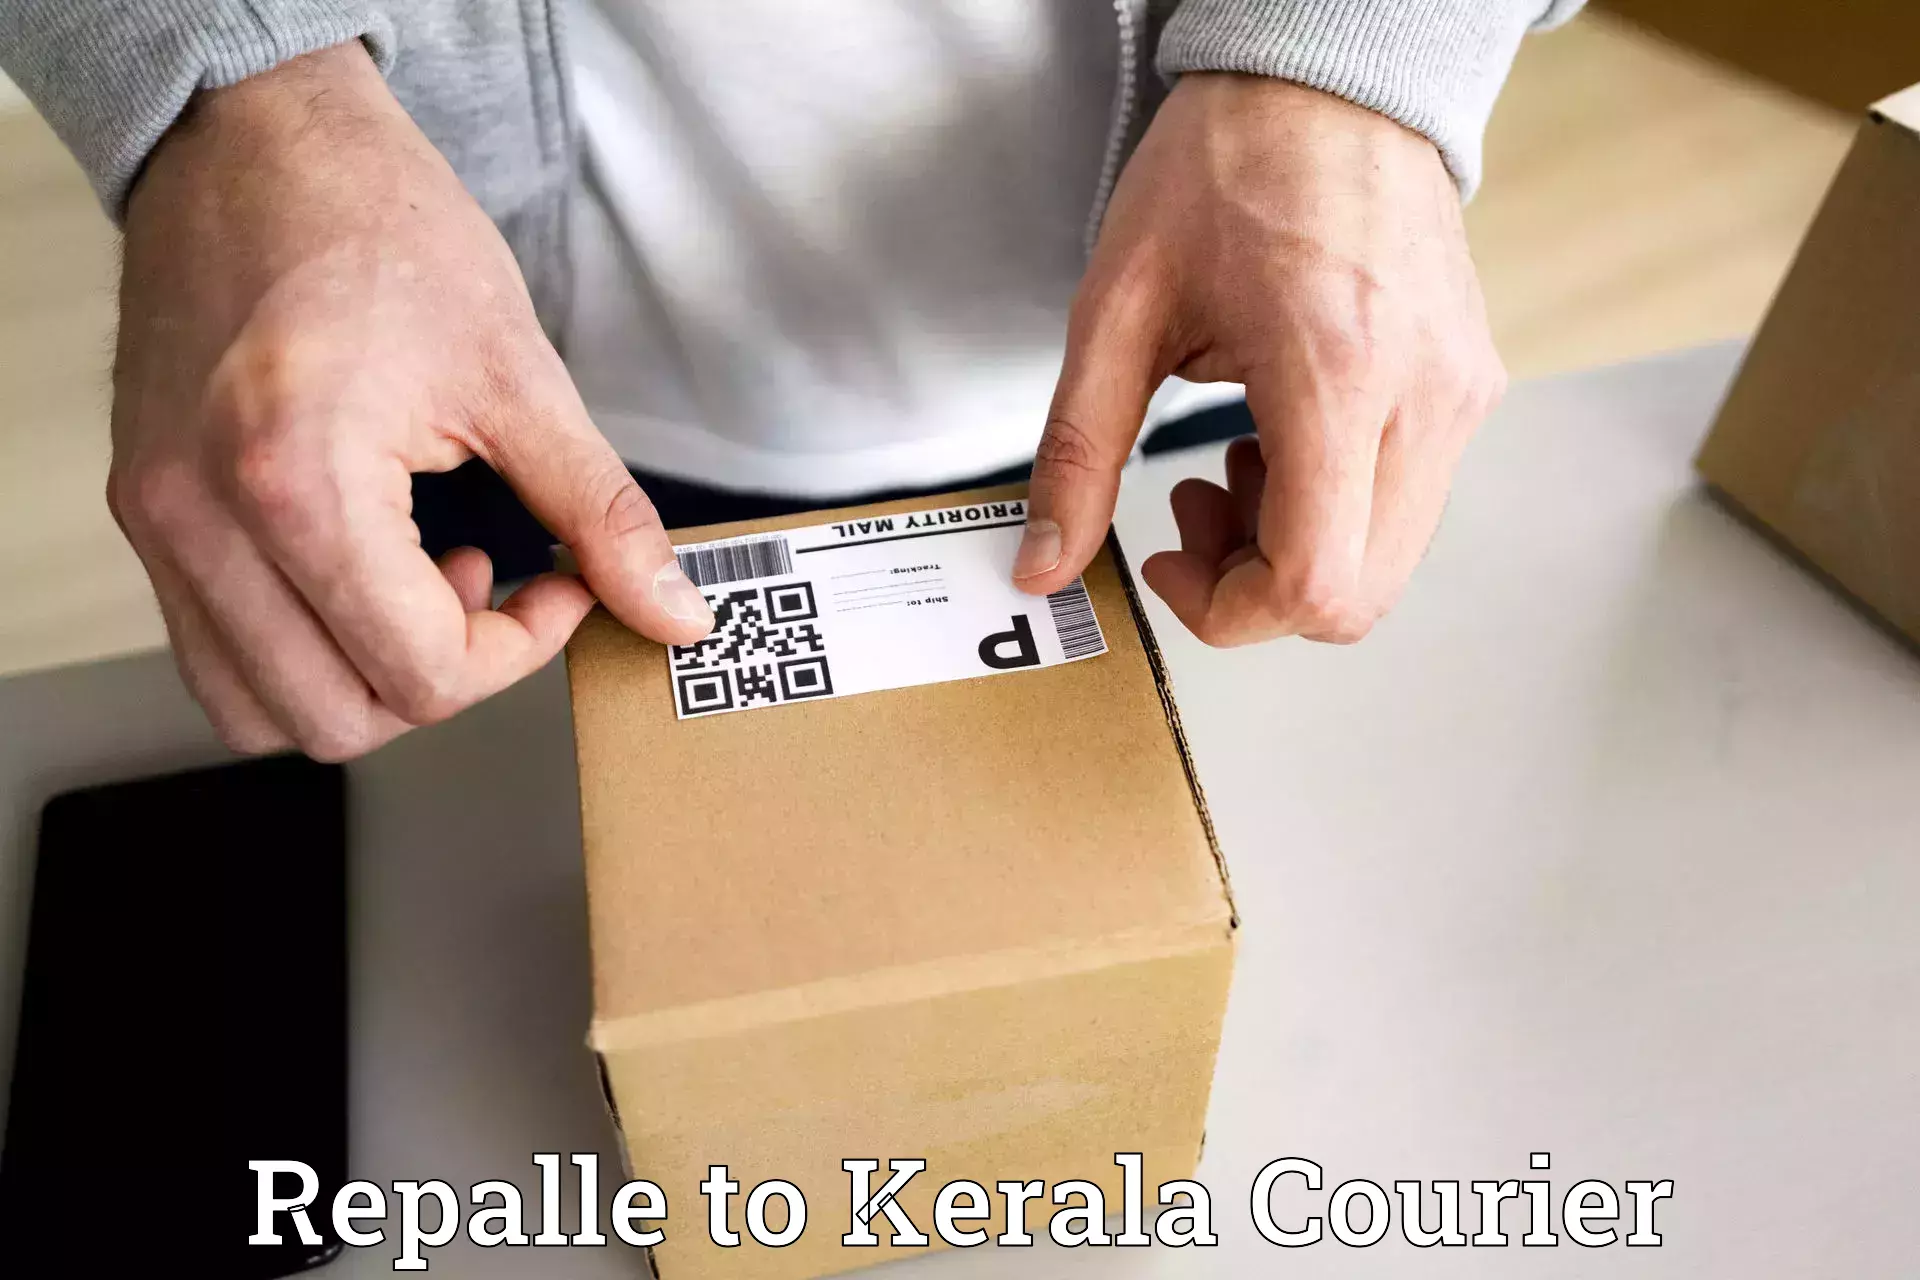 Professional courier handling Repalle to Kerala